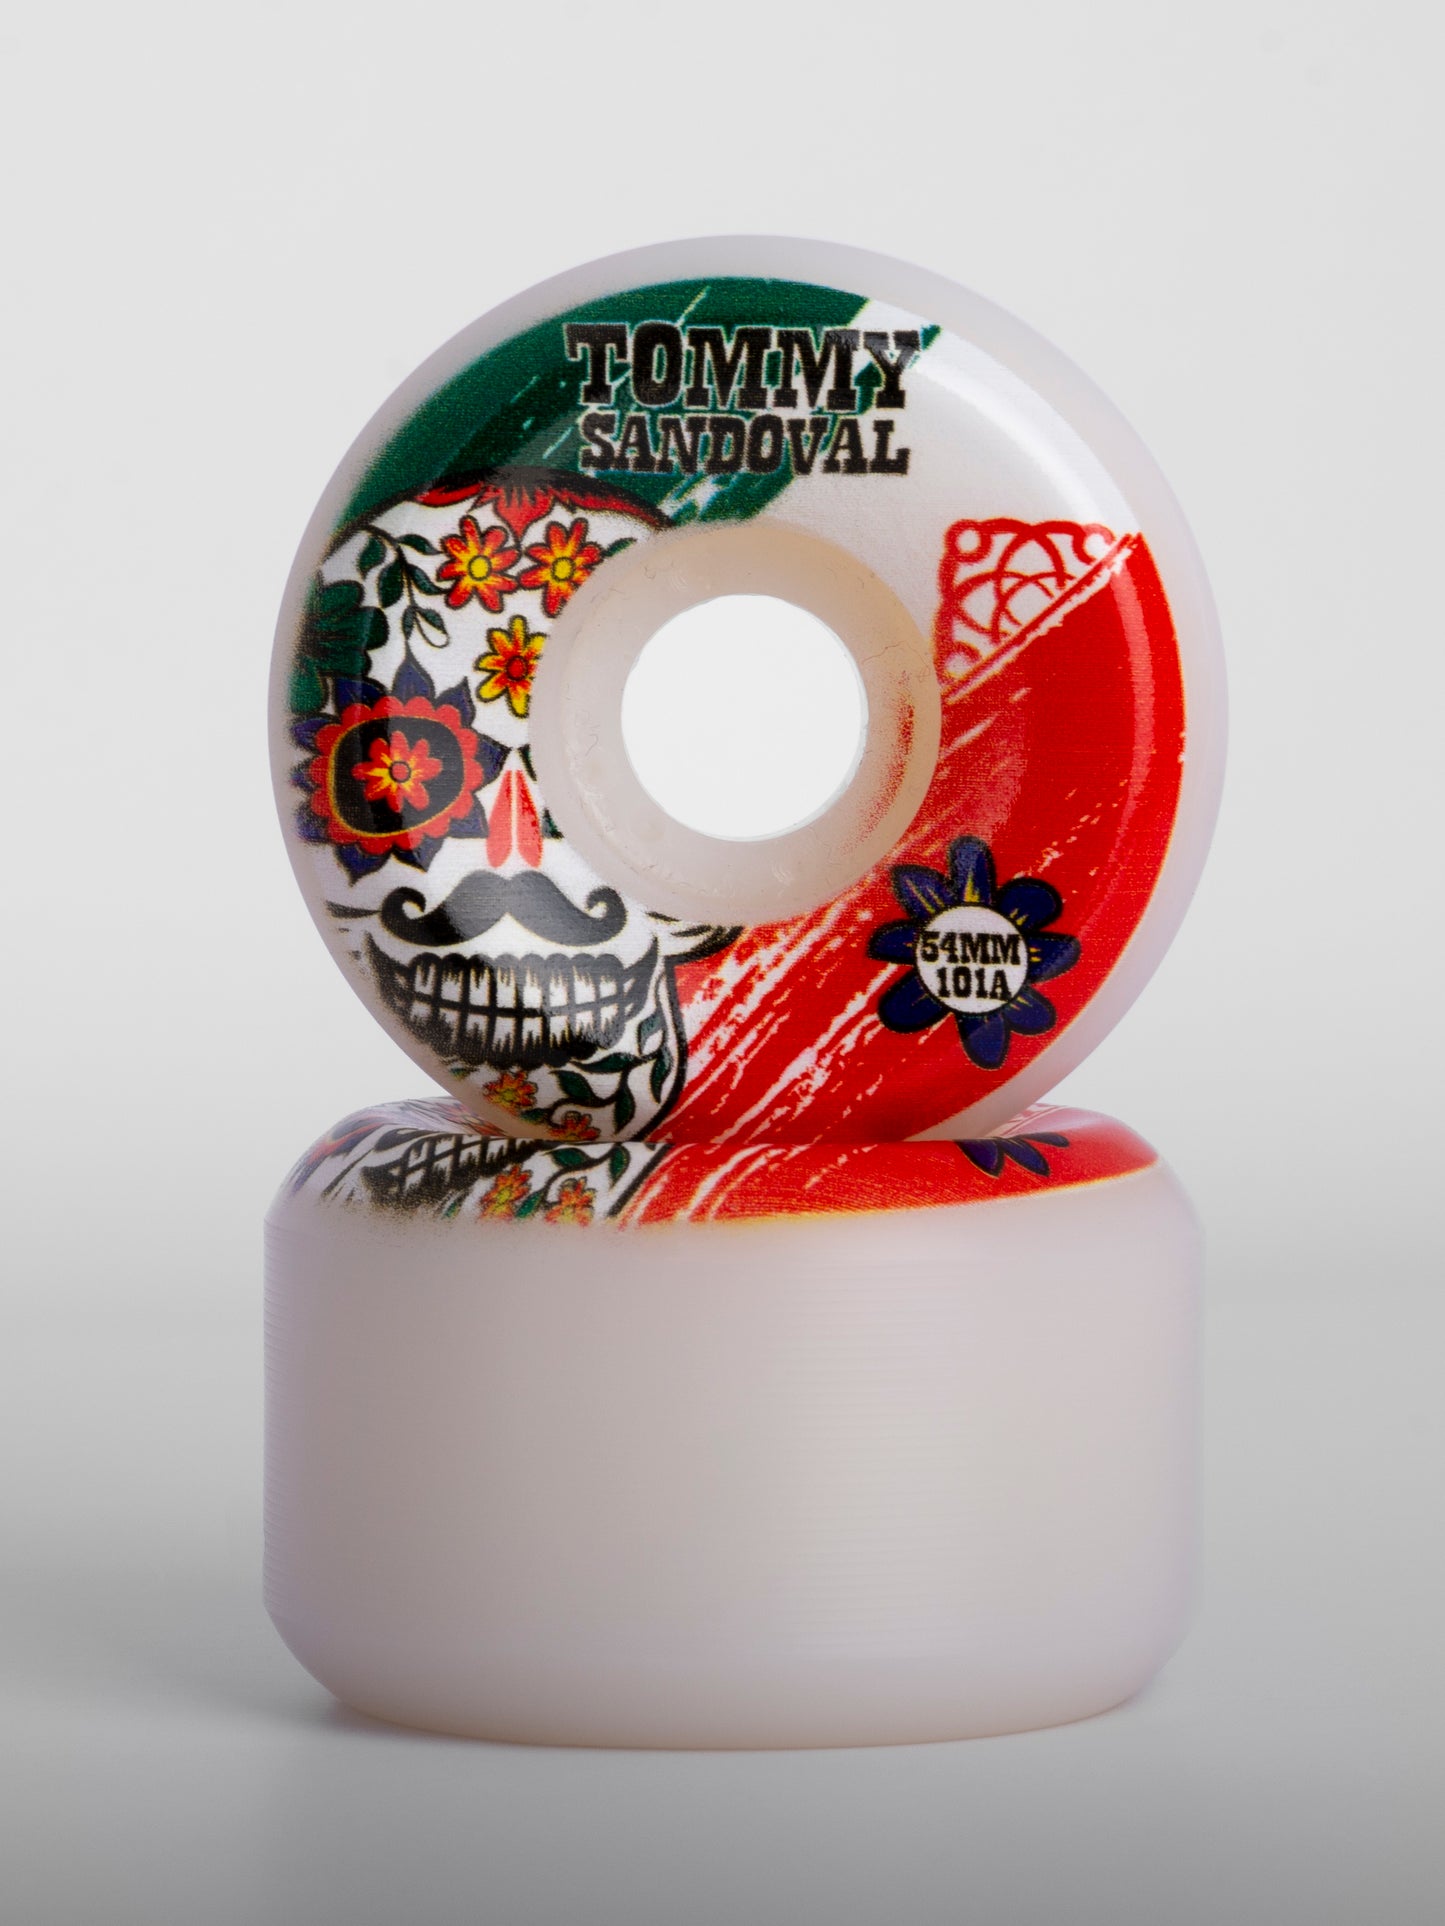 SATORI Tommy Sandoval Day of the Dead Wheels 54mm/101a